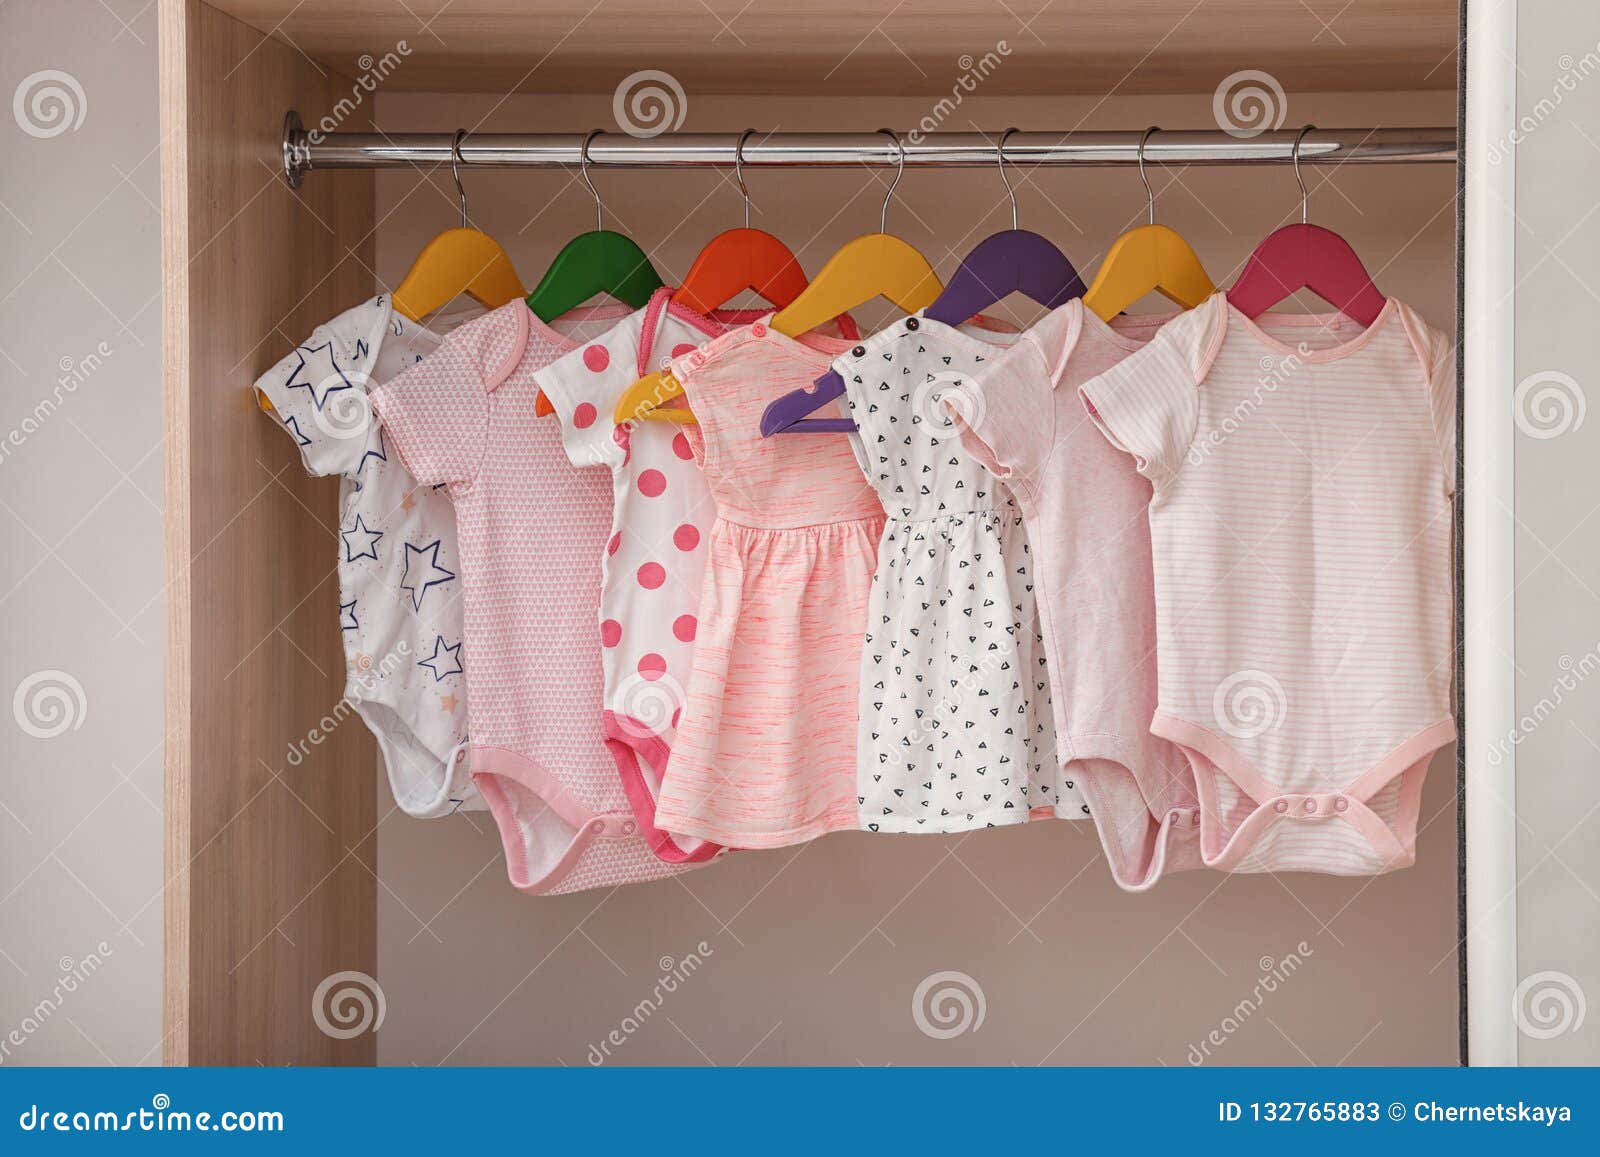 Baby Clothes Hanging On Rack Store Stock Photo 1936987804